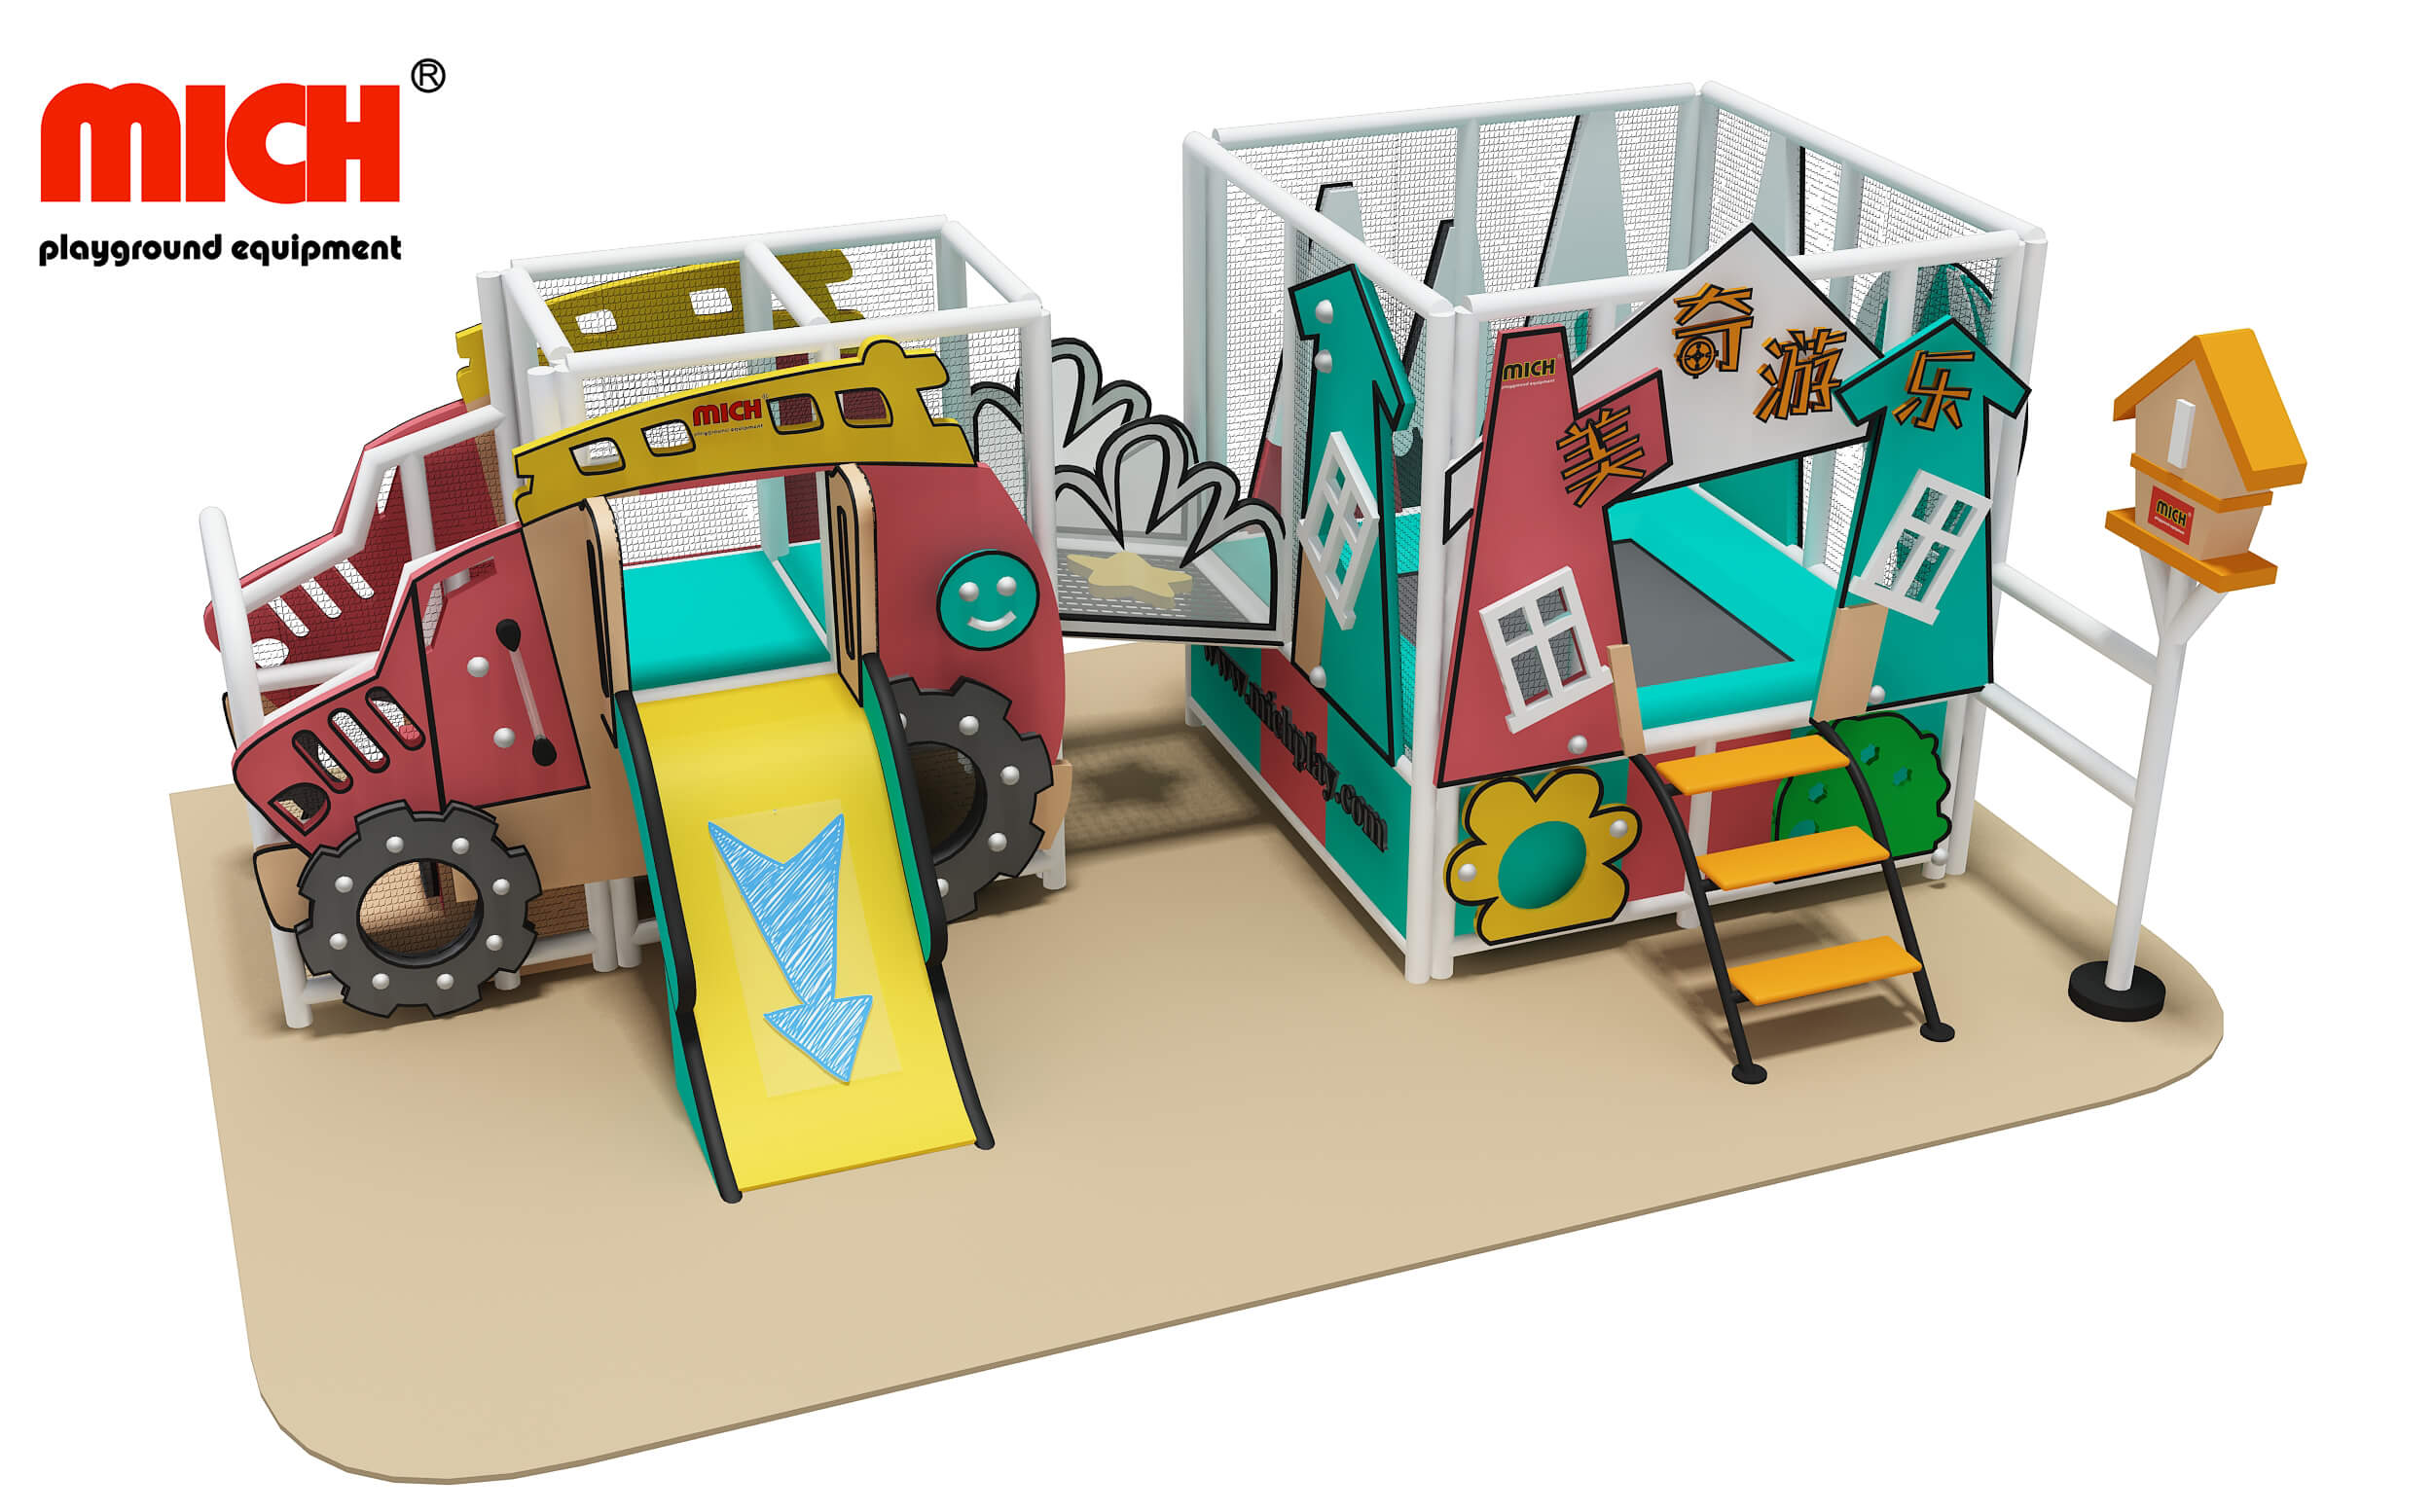 What can you get from an indoor playground?